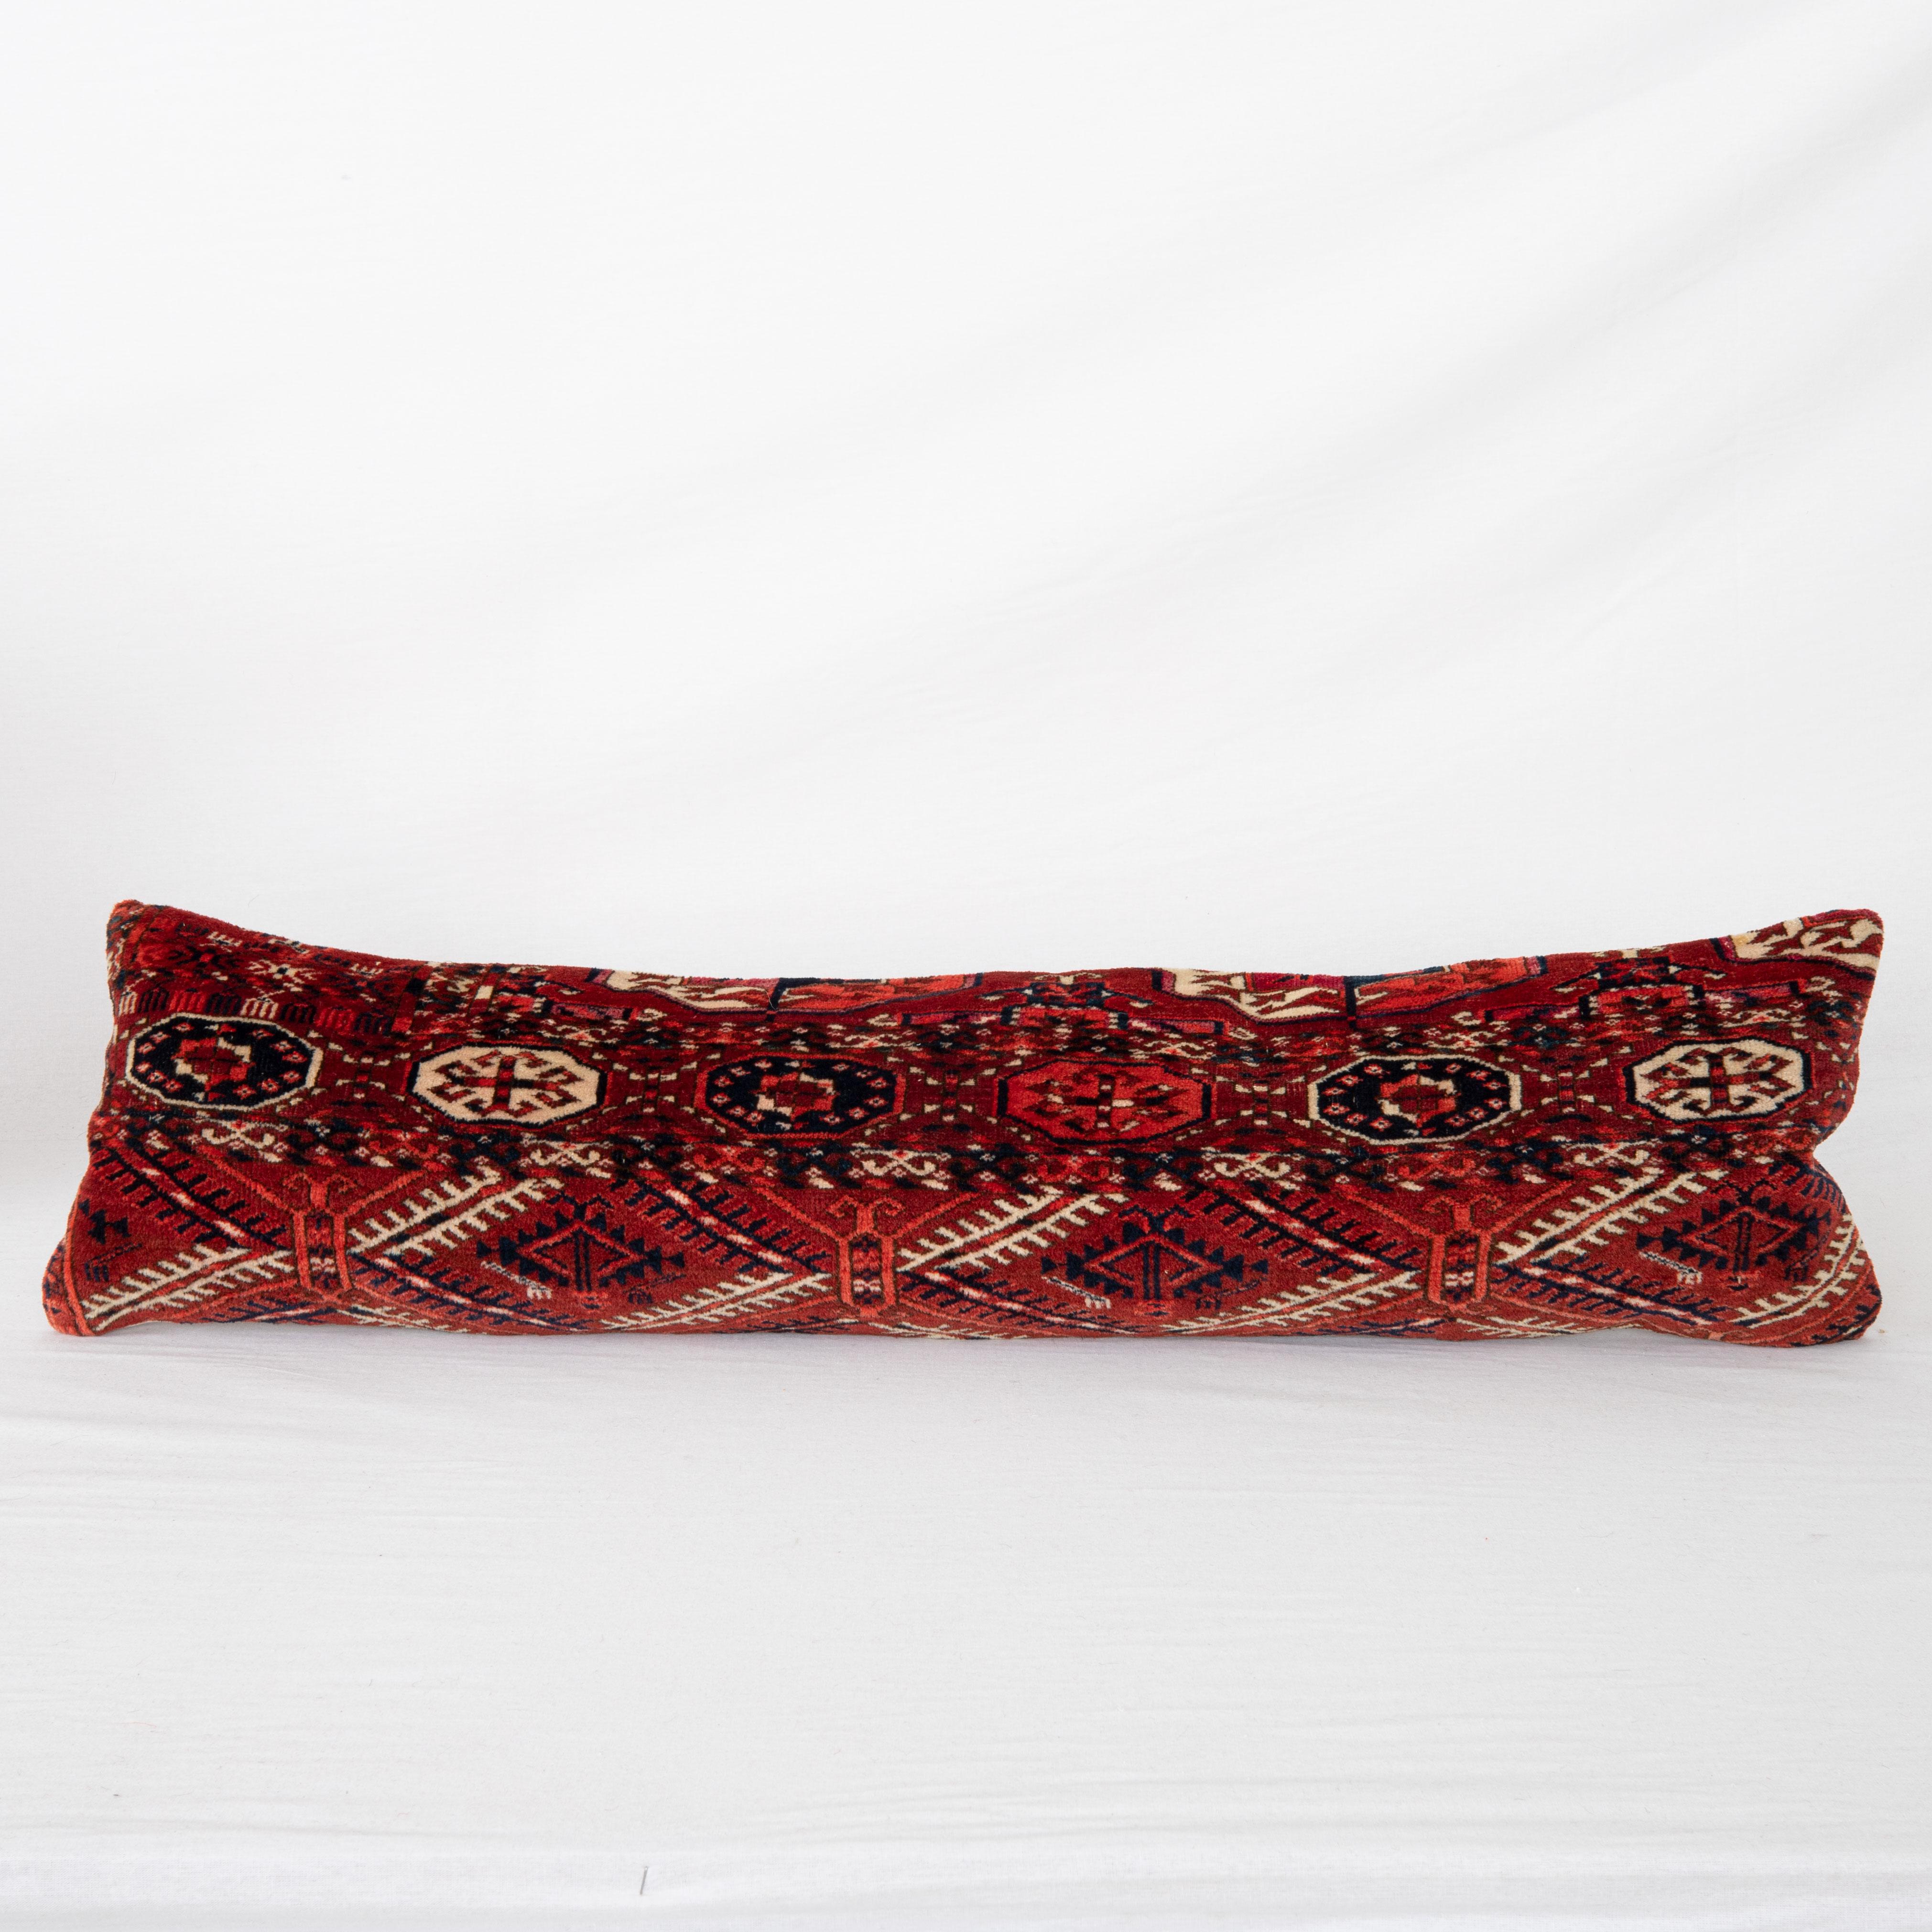 Pillowcase is made from an antique Turkmen, Tekke tribe main rug fragment dating back to 1860s.

It does not come with an insert but a bag made to size to accommodate insert materials.
Linen in the back.
Zipper Closure.
Dry Clean is